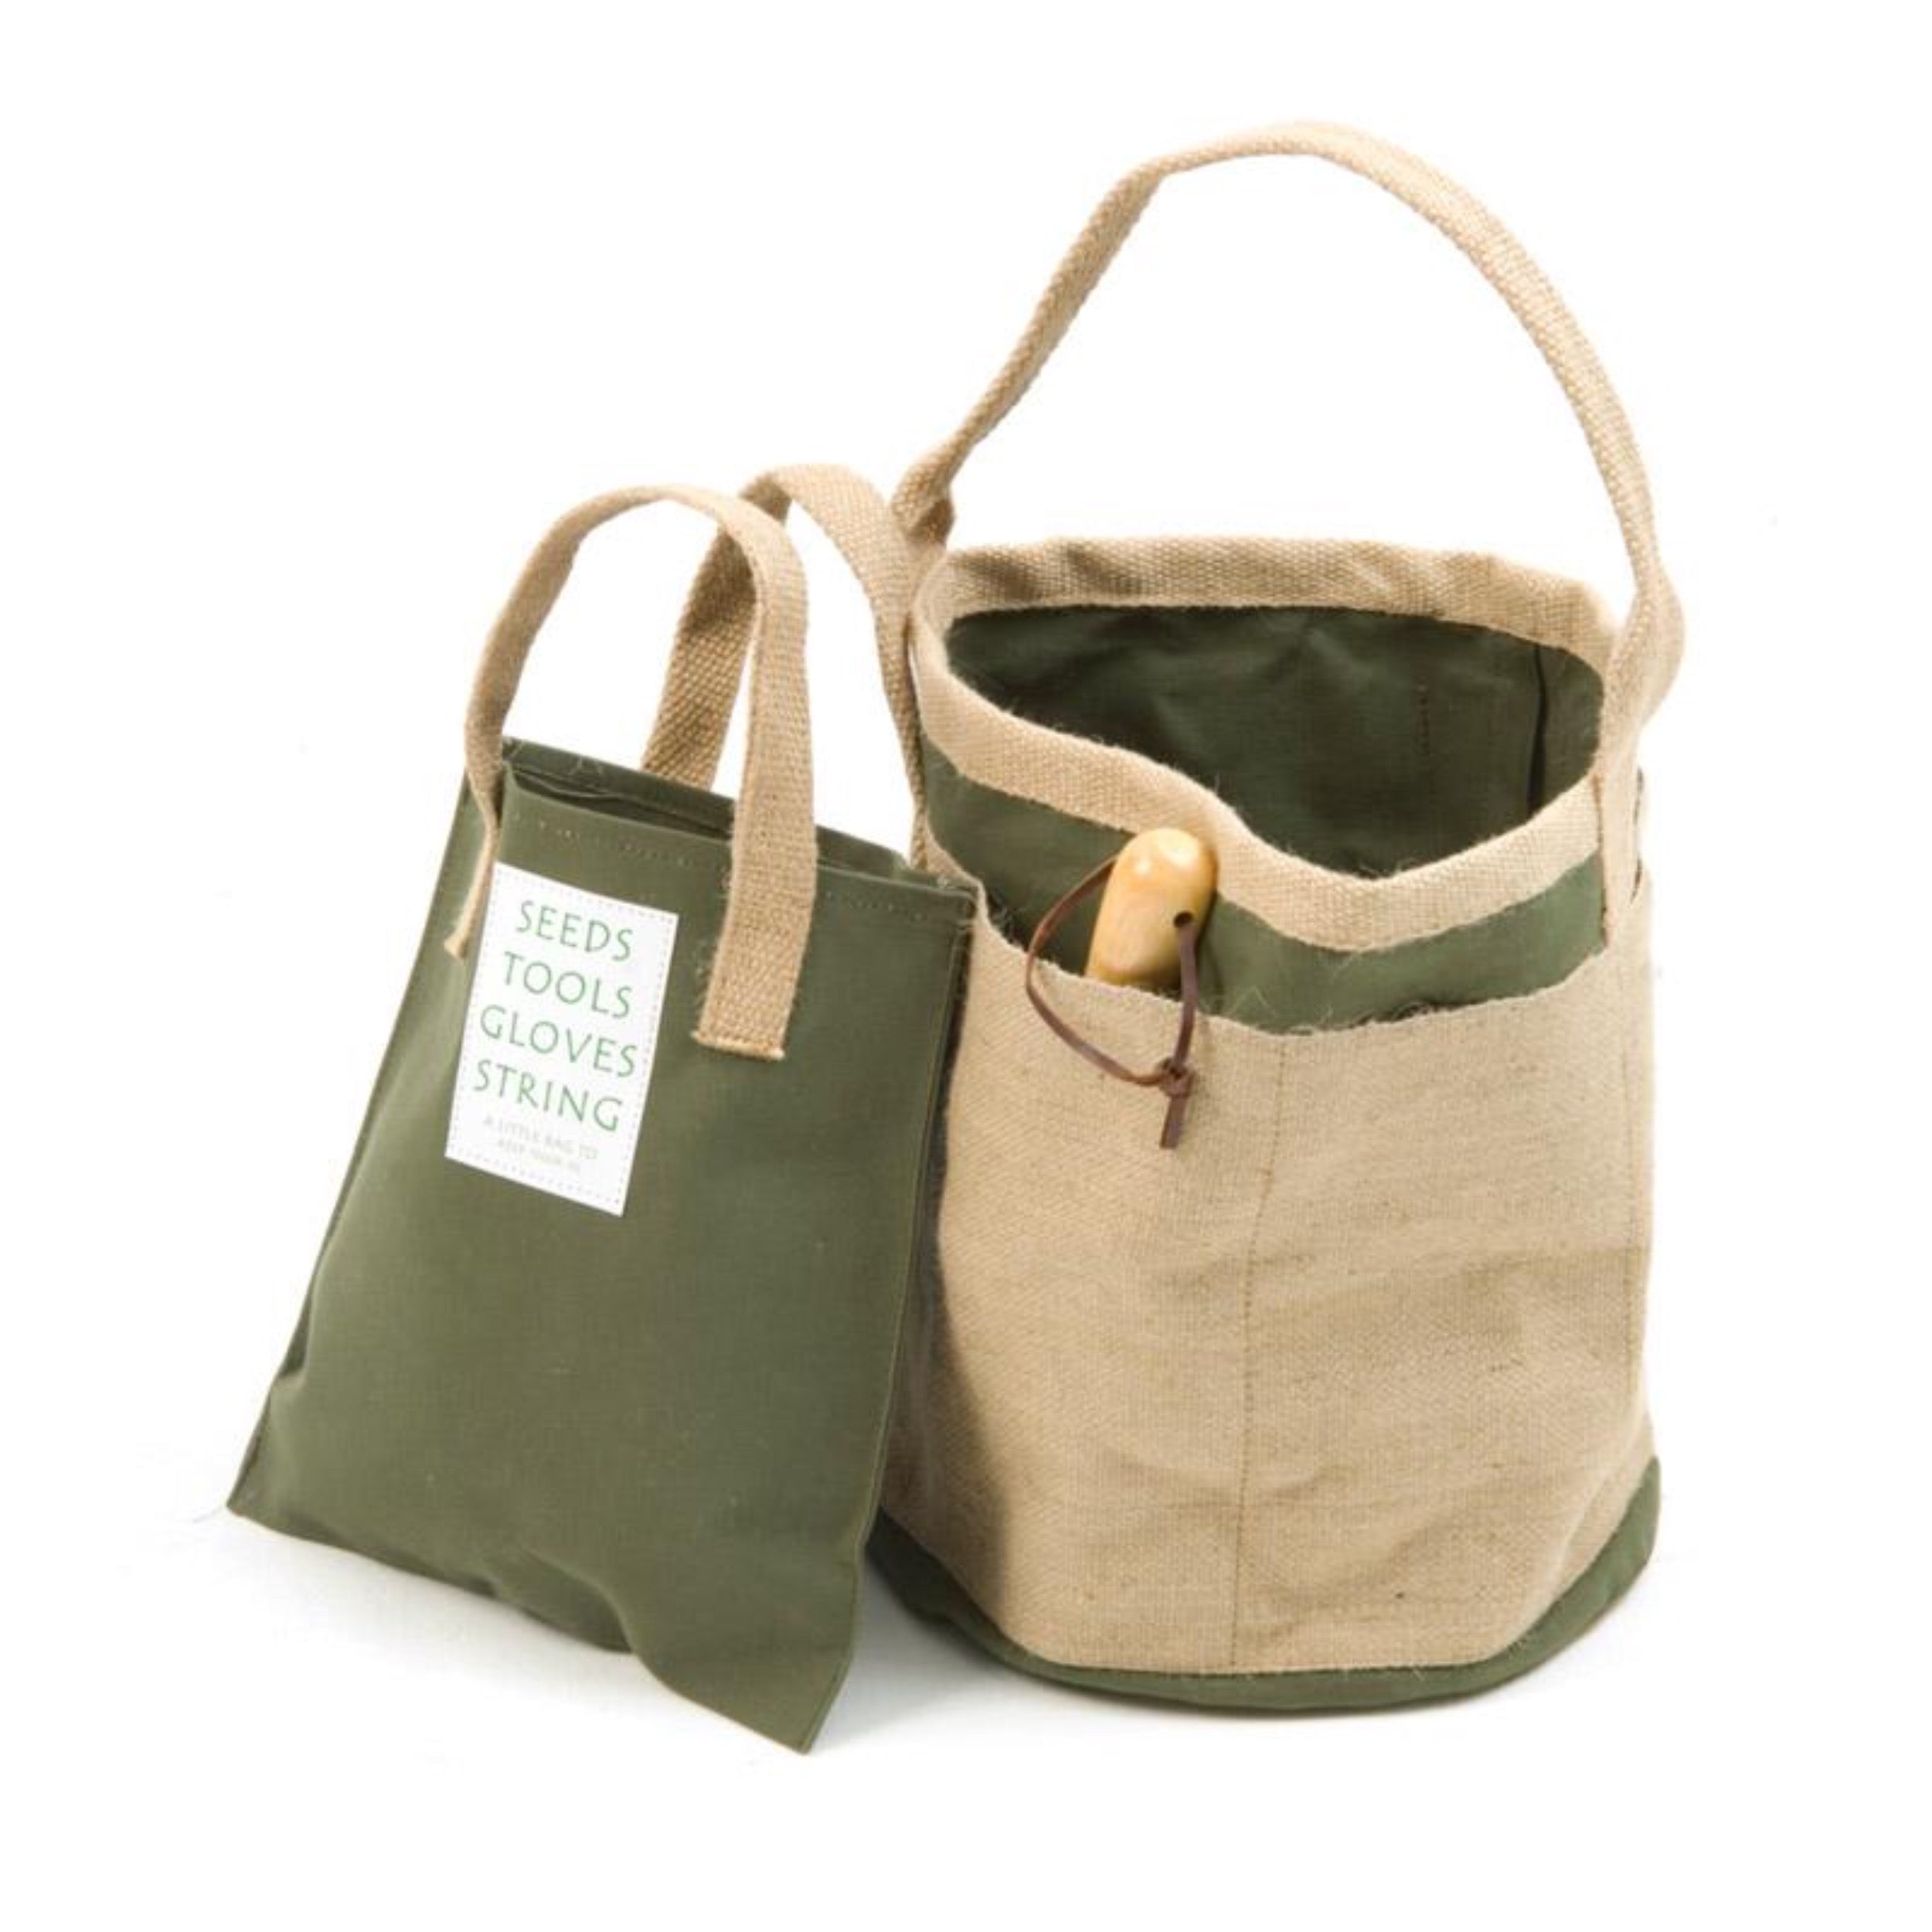 Carrier Company Gardener's Pail in Jute and Olive Canvas